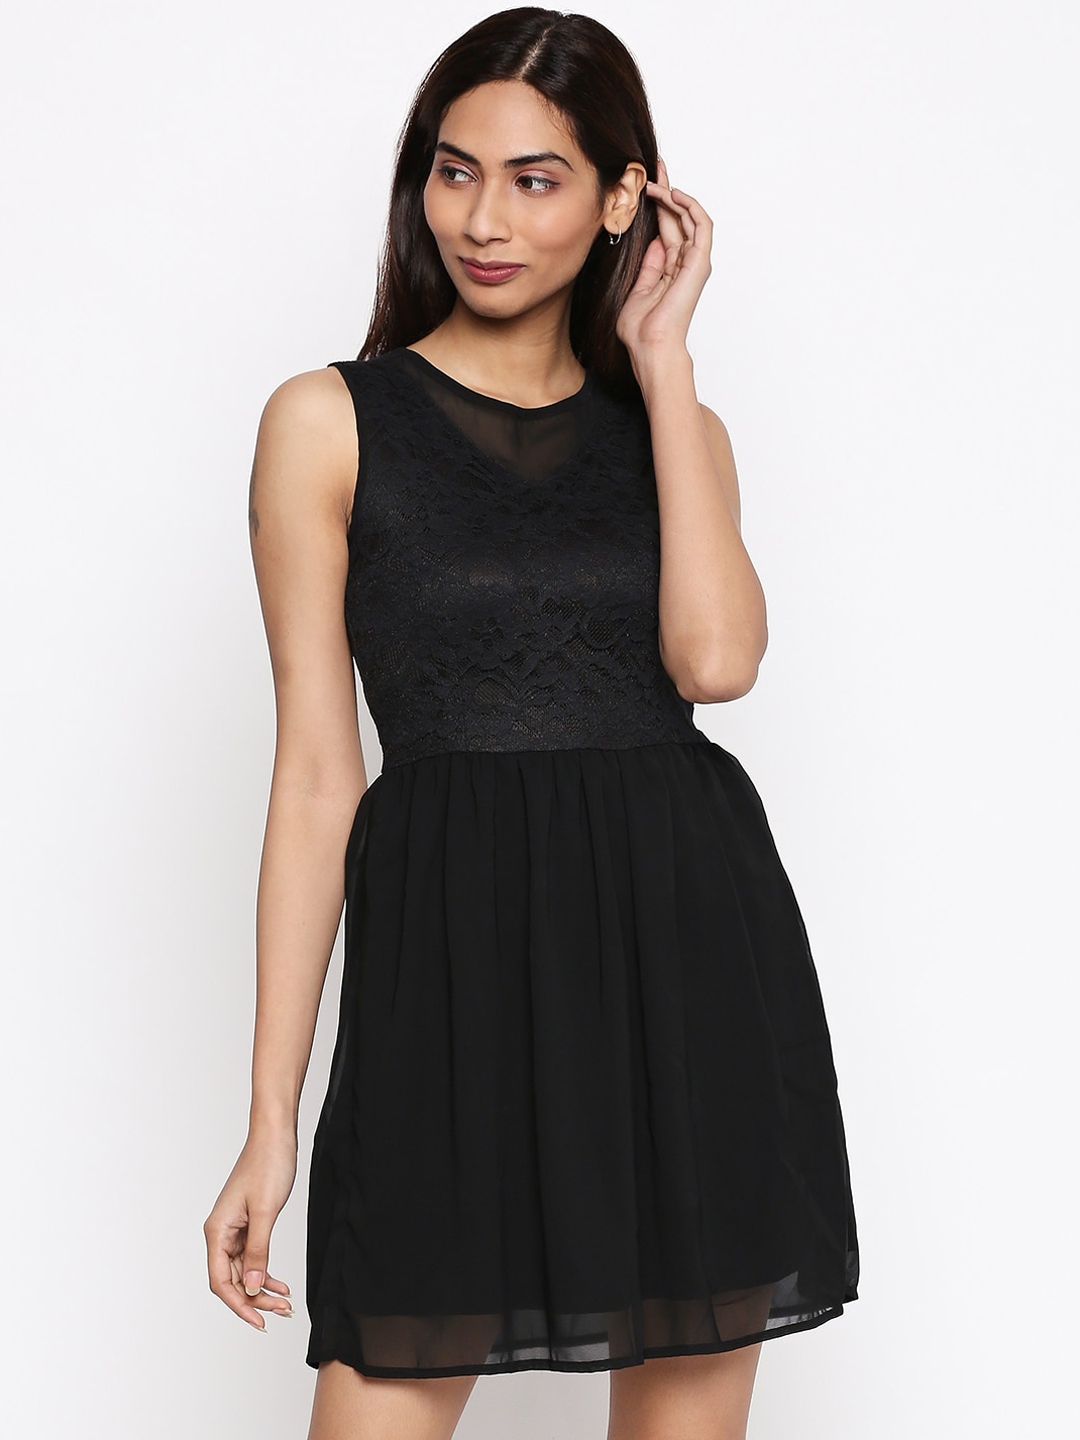 Buy People Black Fit And Flare Dress - Dresses for Women 14732826 | Myntra